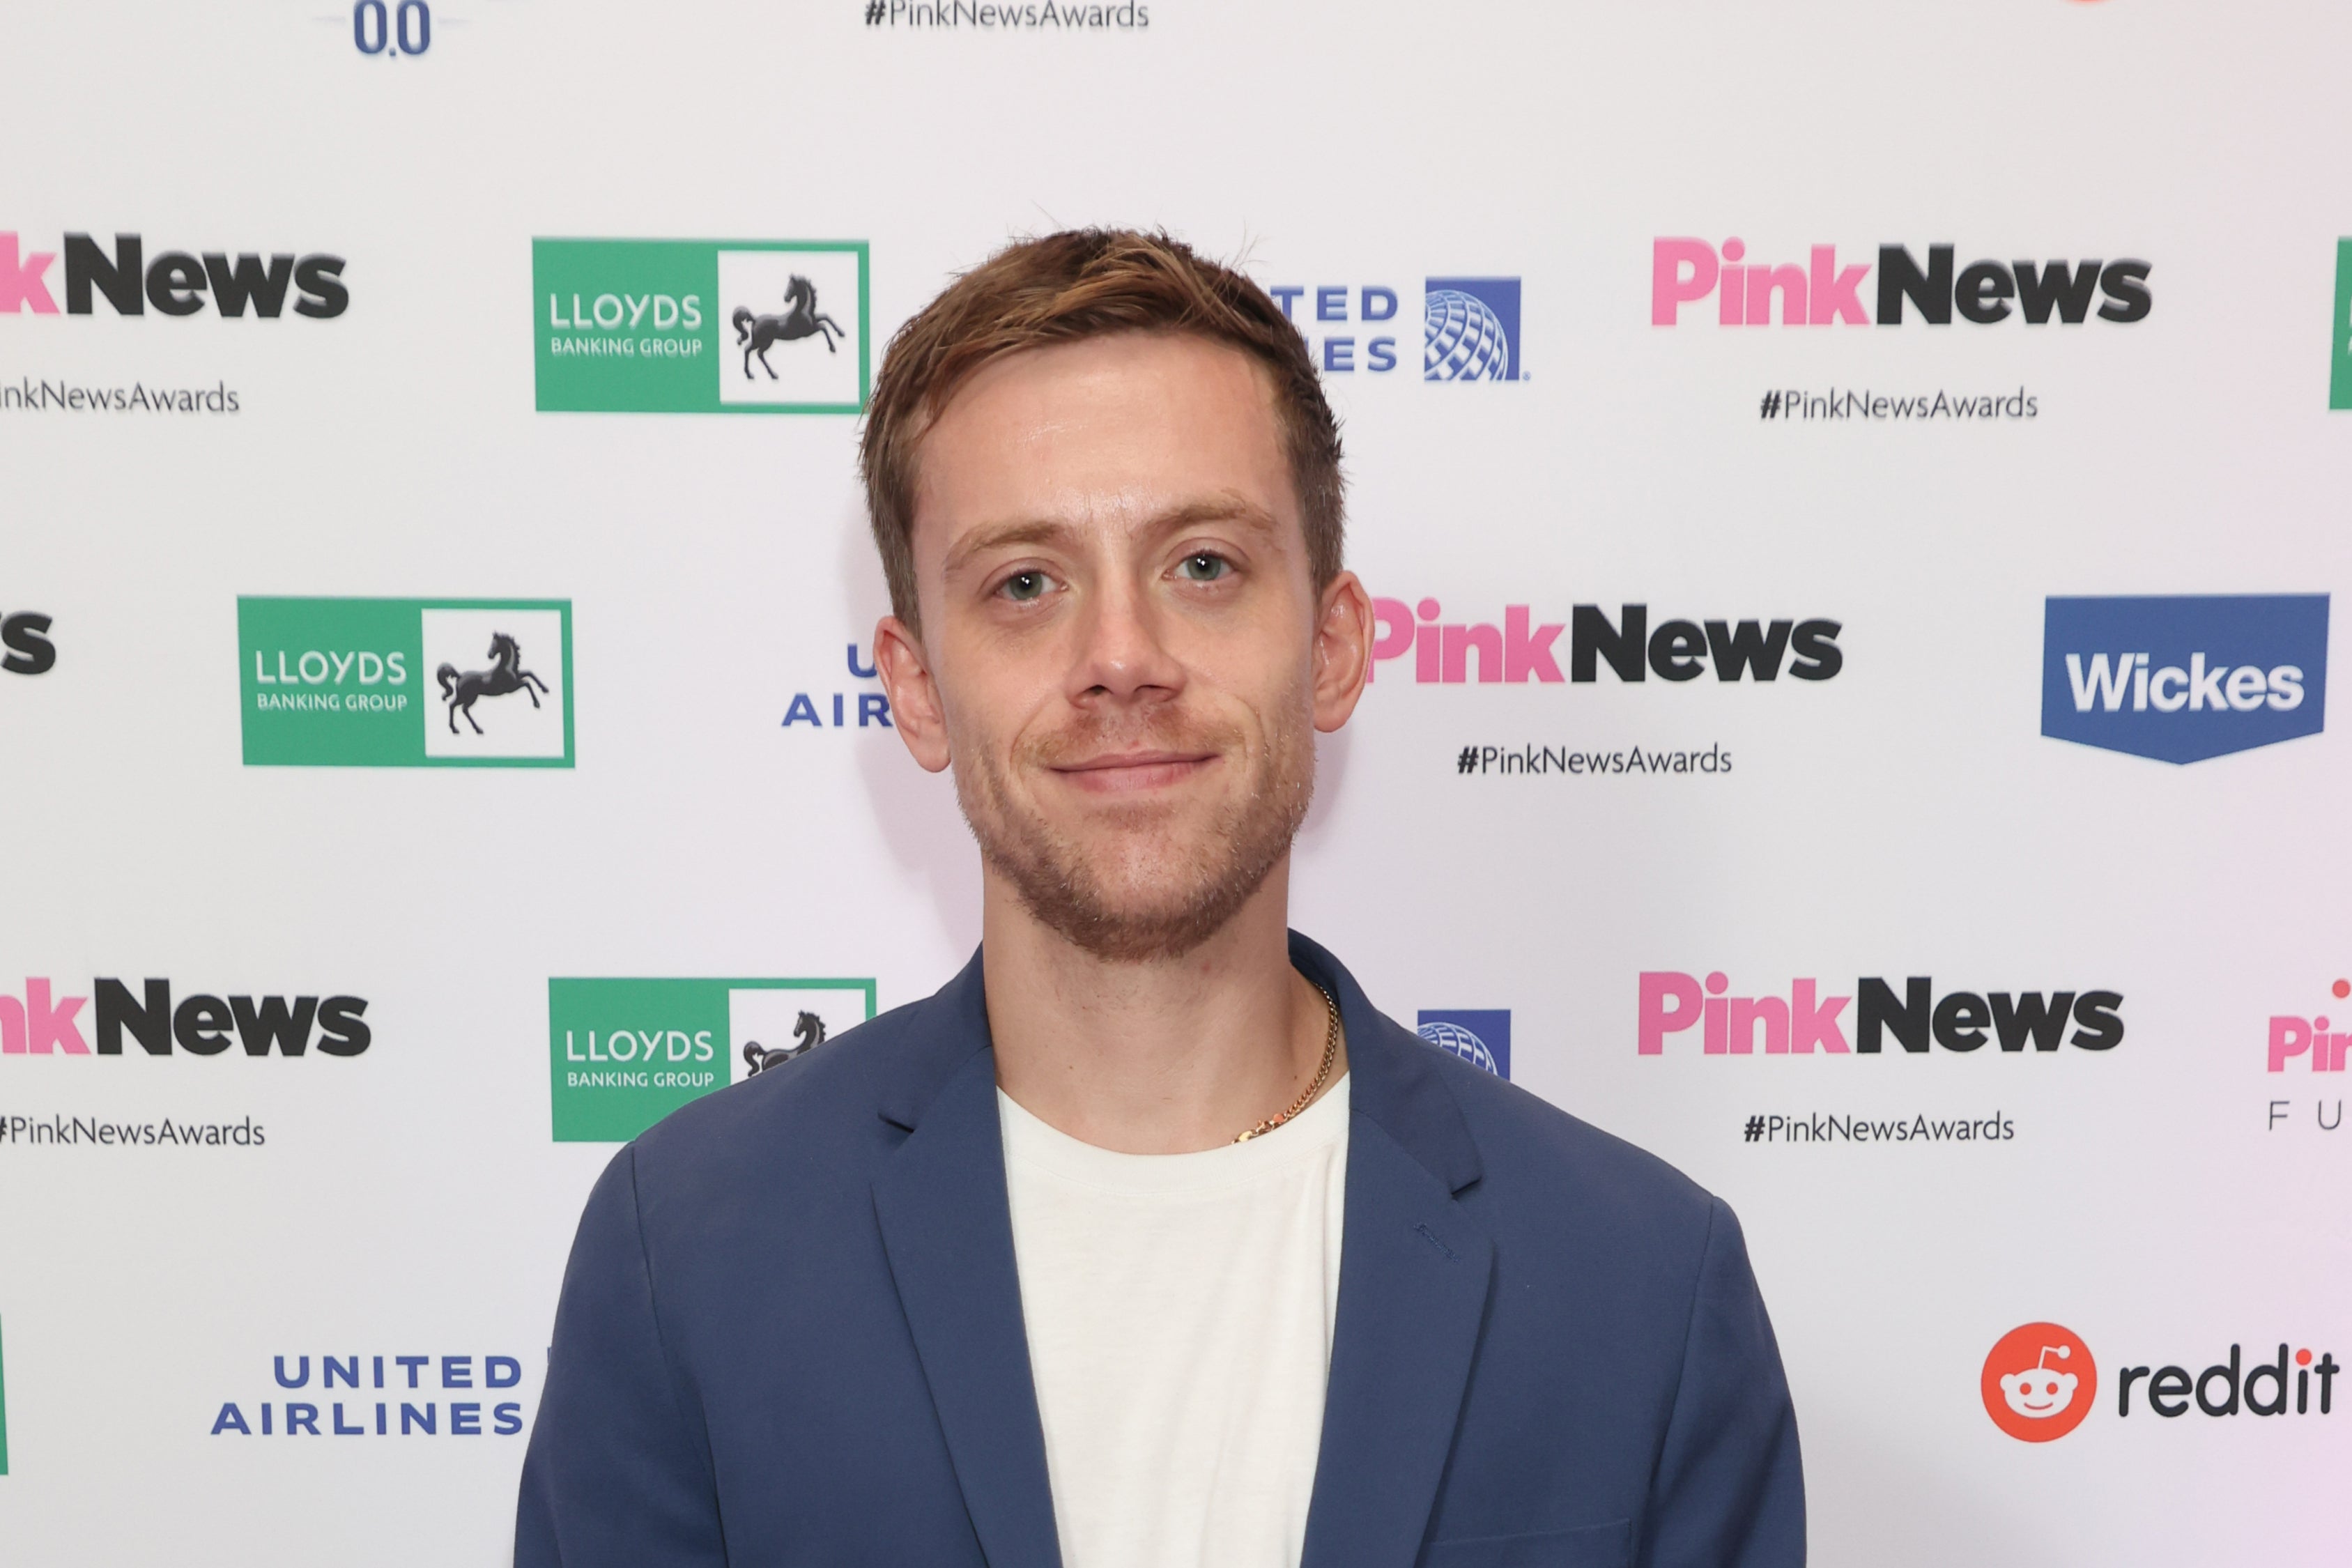 Journalist and activist Owen Jones has expressed regret for speculating about Kate’s absence from public life